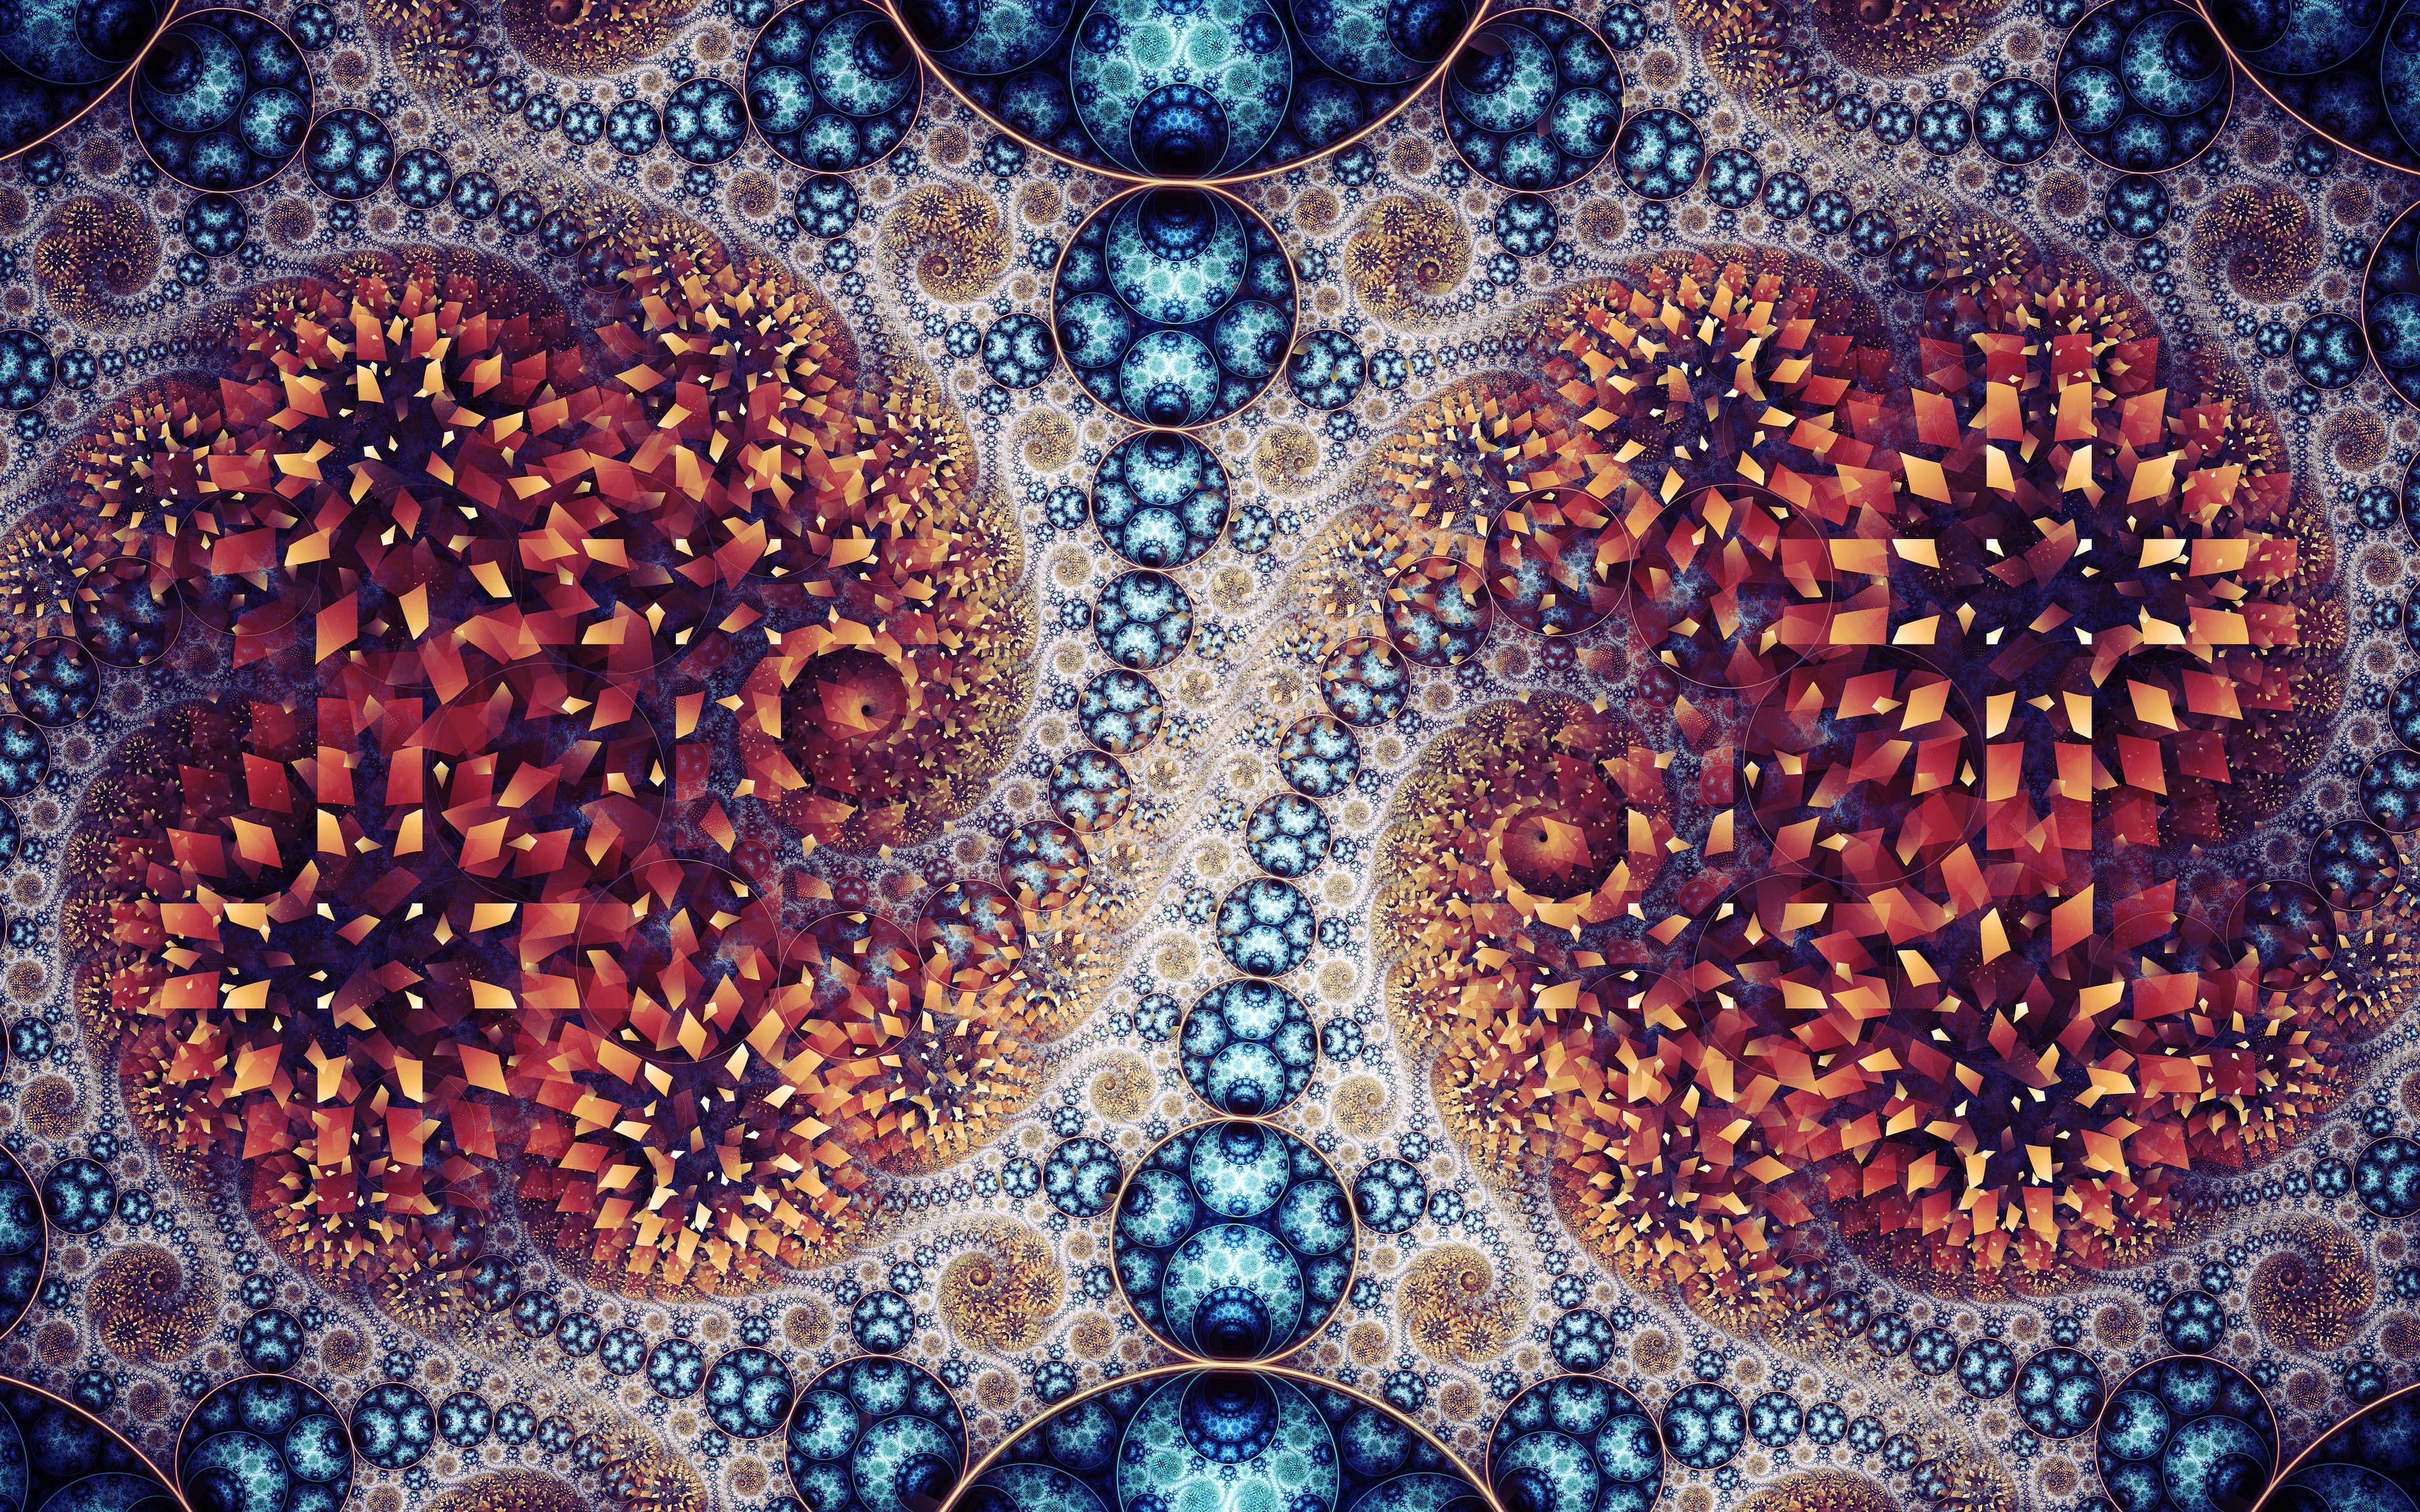 Fractal Abstract